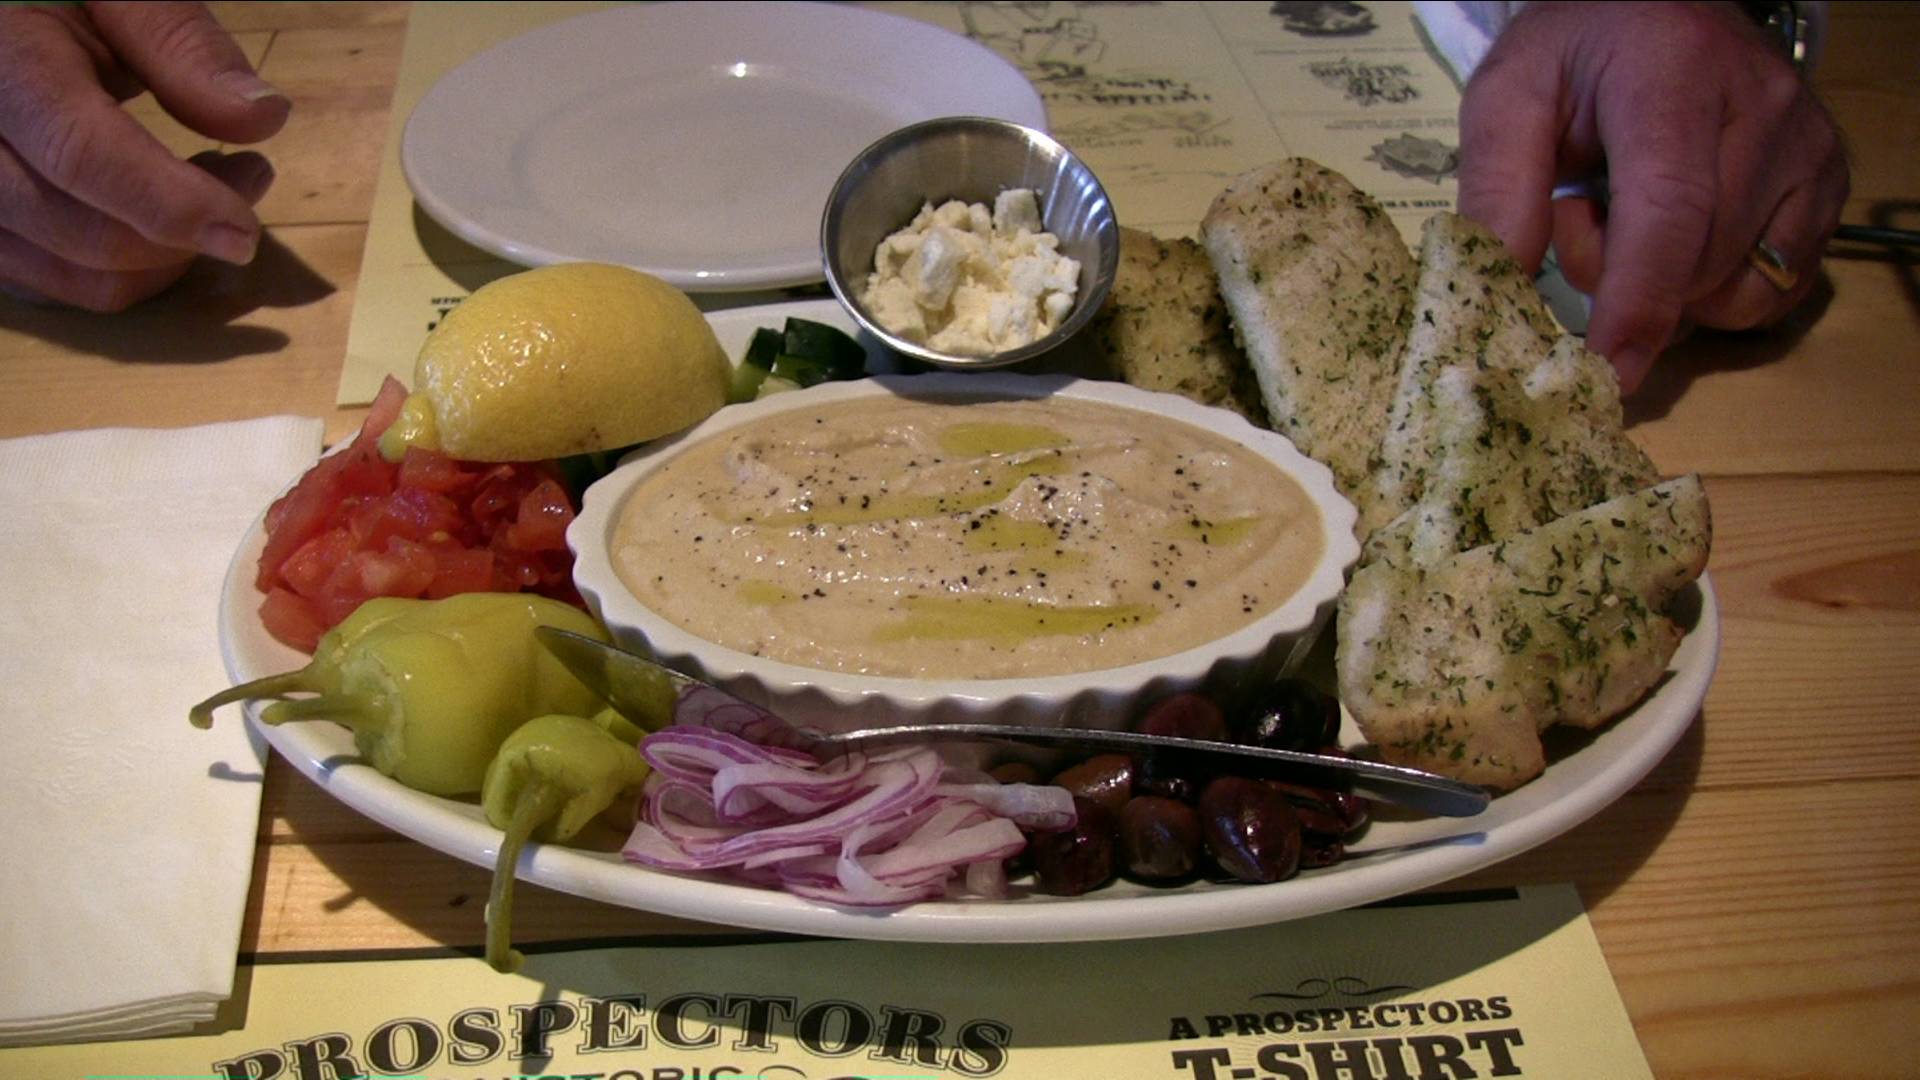 Click to enlarge - Appetizer hummus platter as served by Prospector's Pizza in Denali, Alaska.